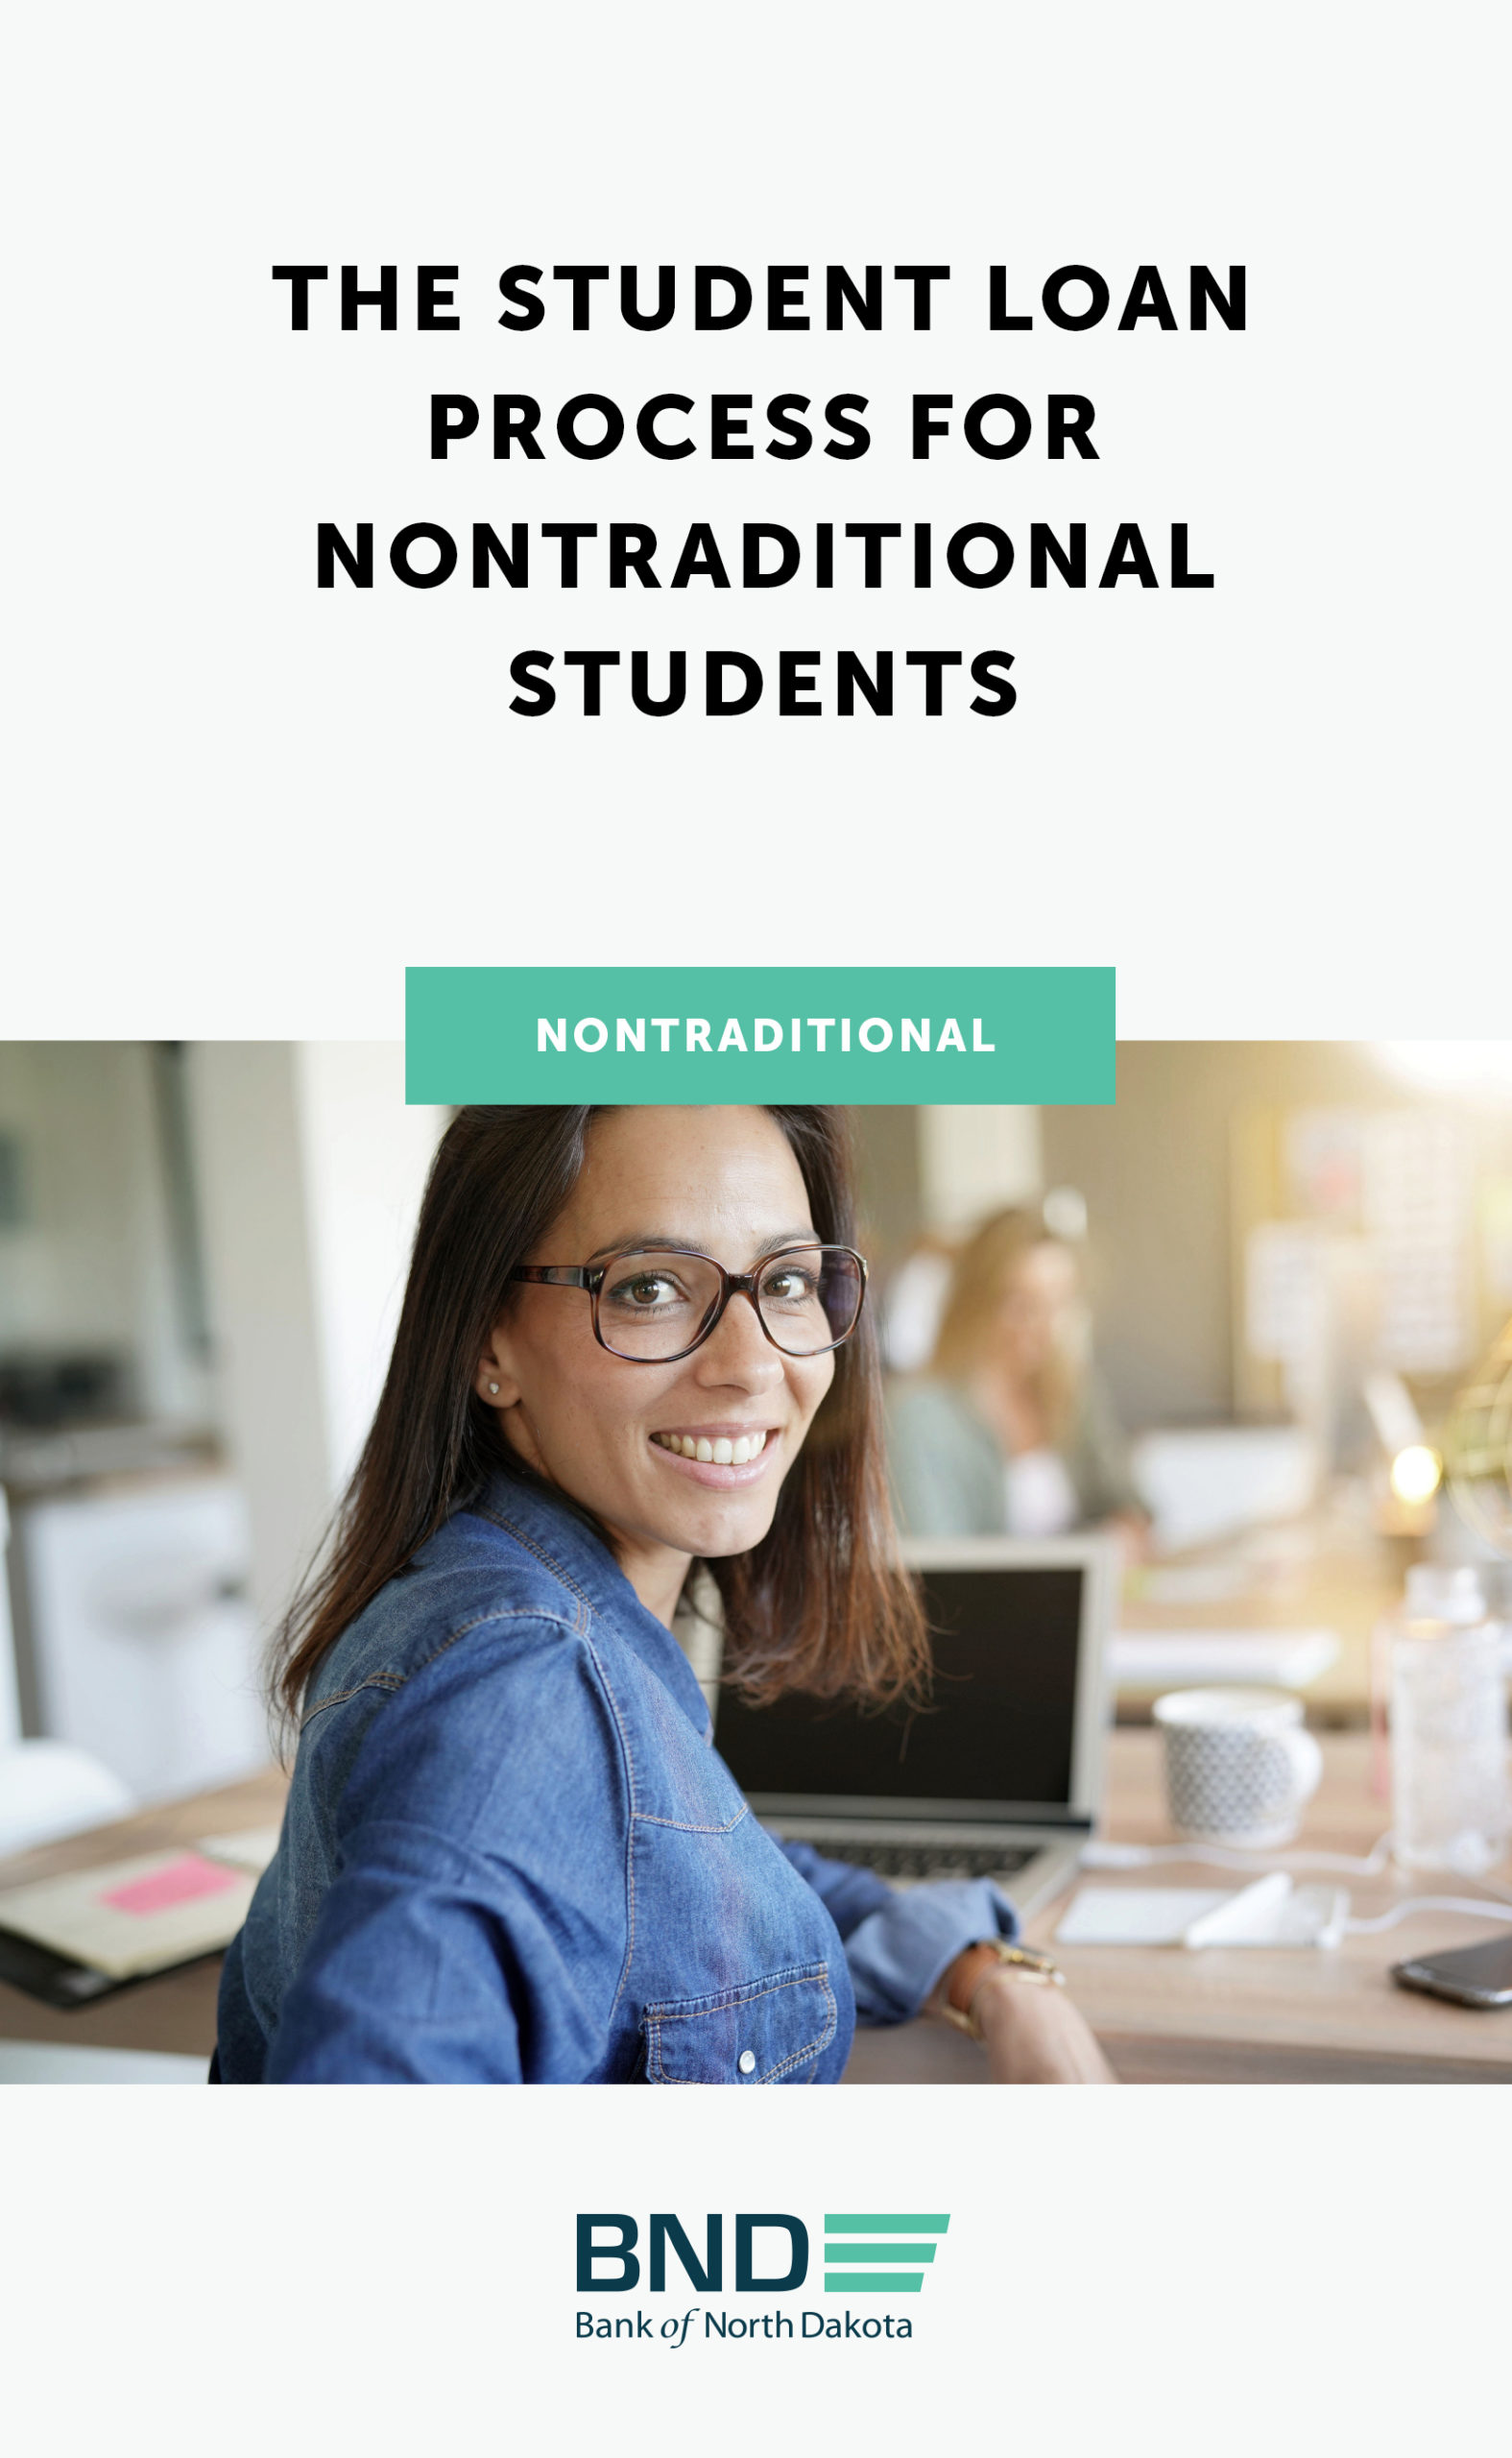 The Student Loan Process for Nontraditional Students